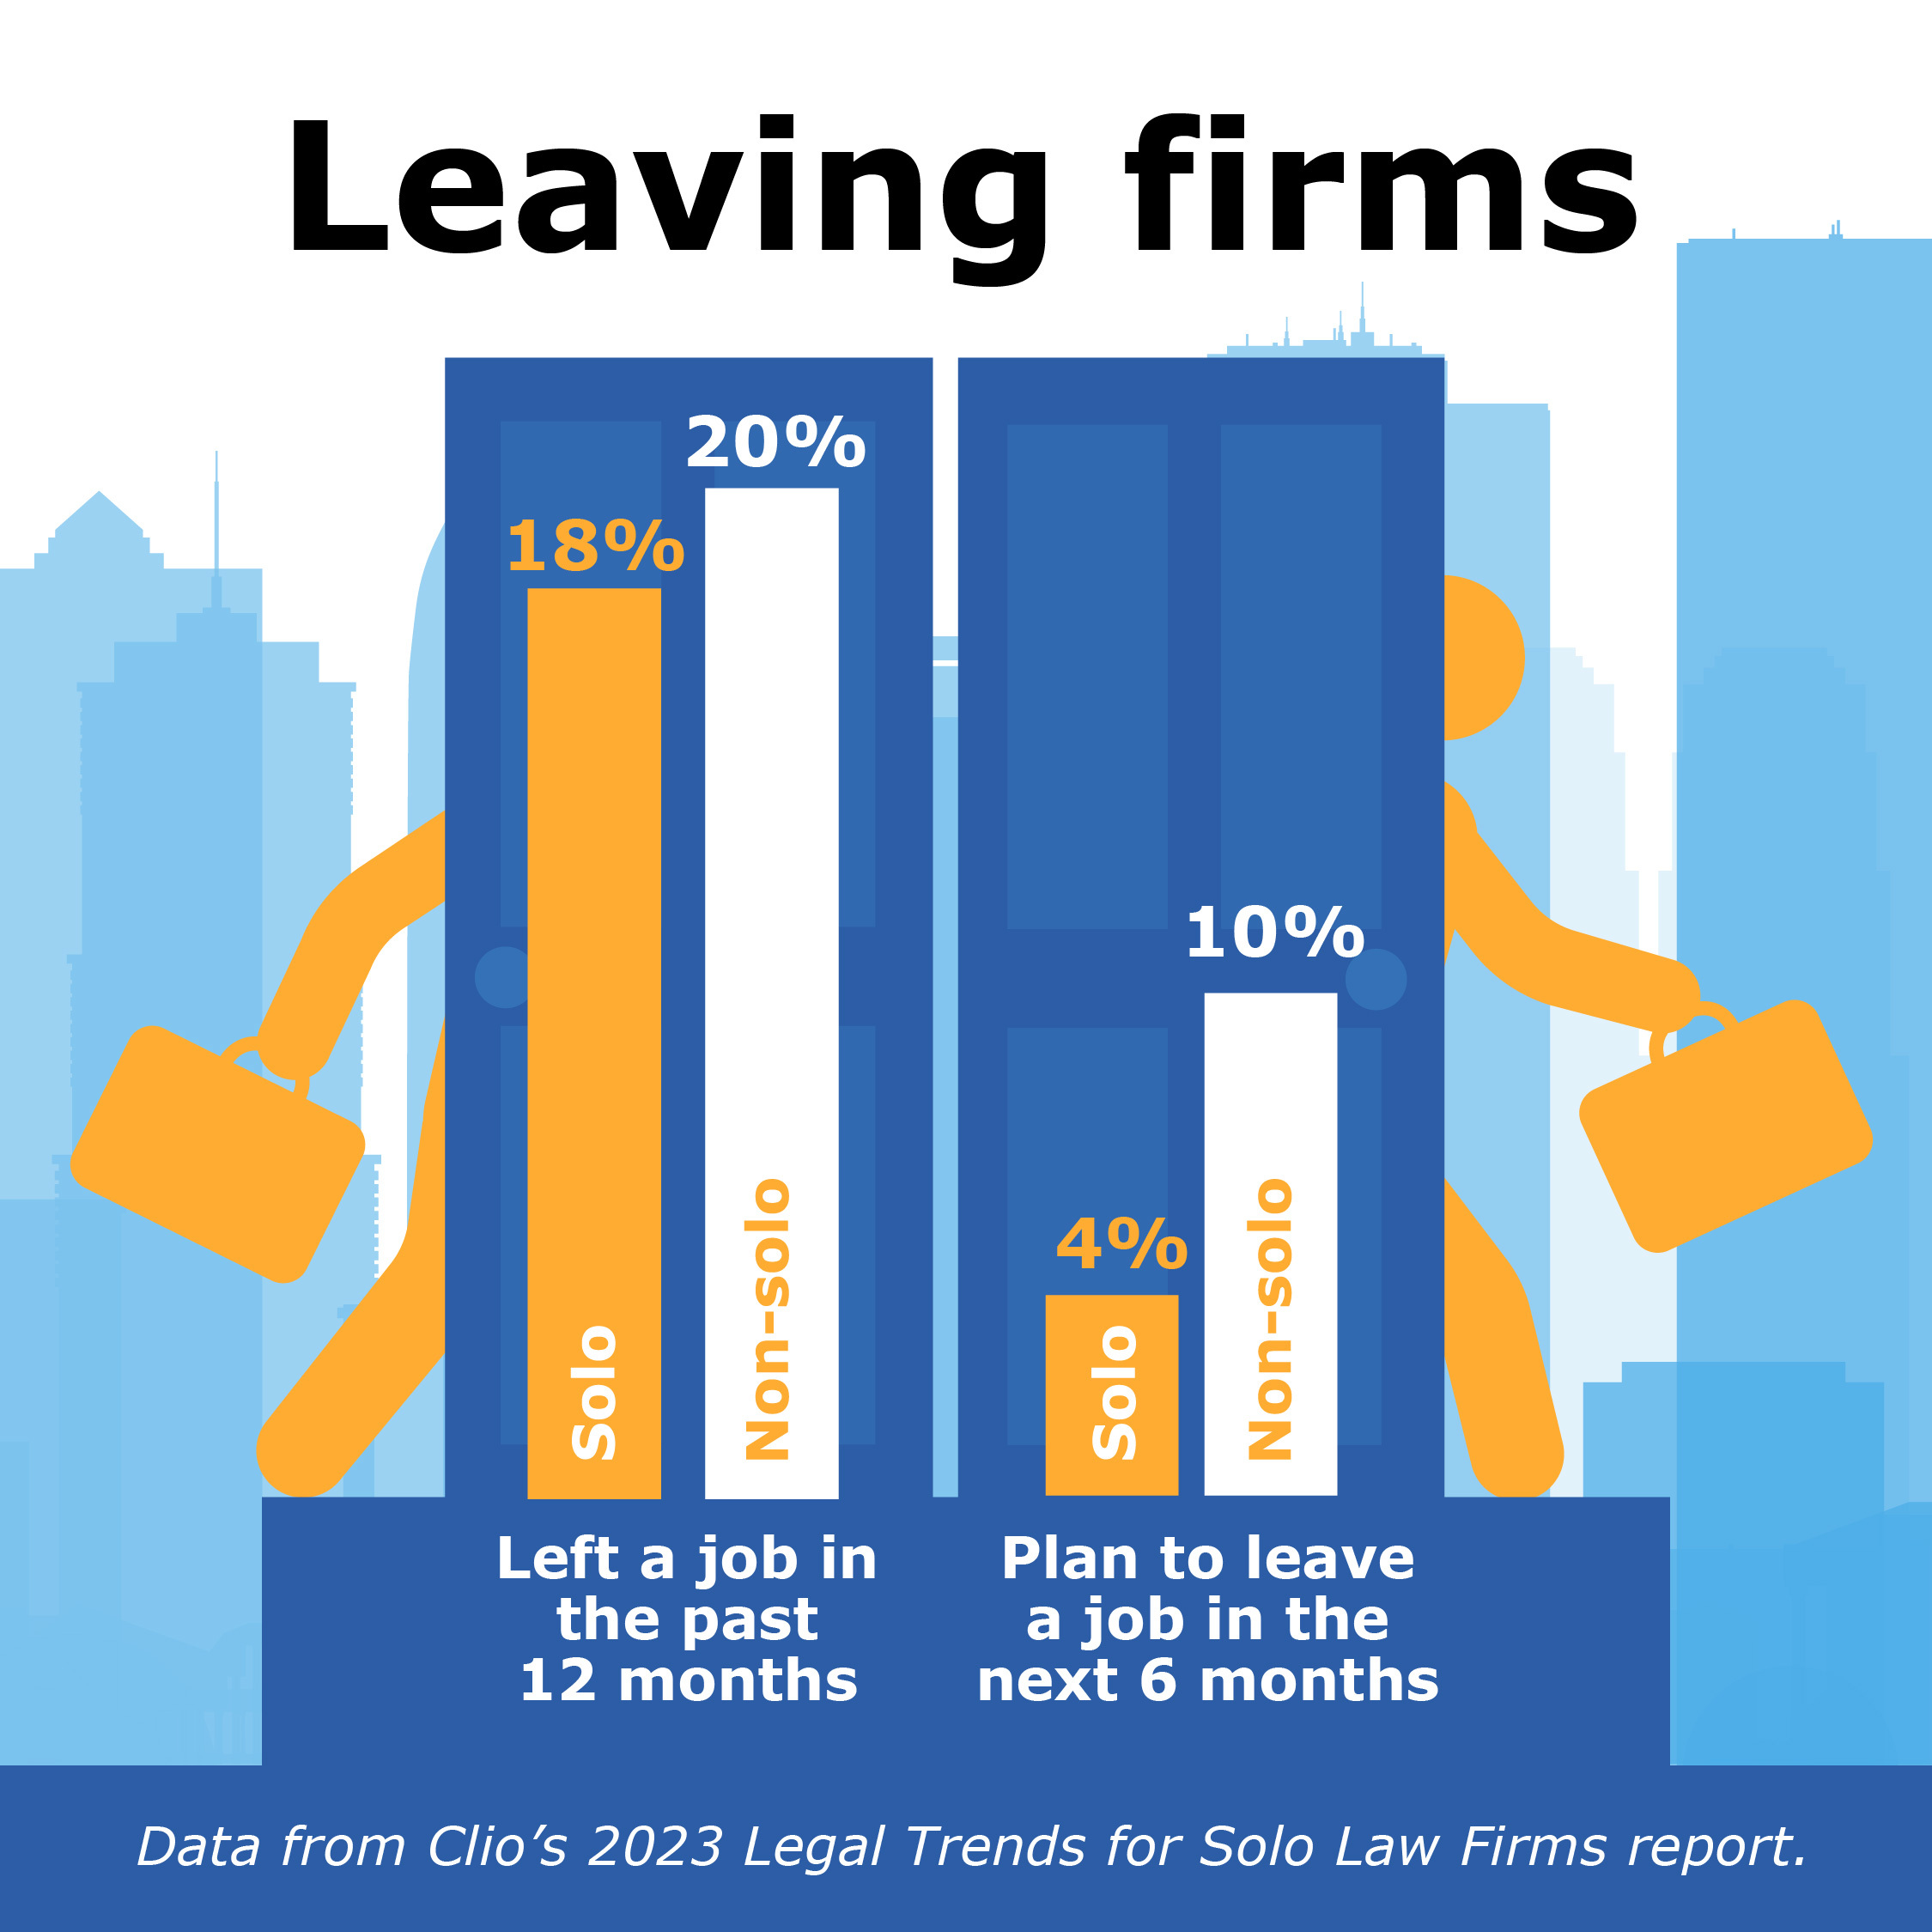 Data from Clio’s 2023 Legal Trends for Solo Law Firms report shows non-solo attorneys may have left a job in the past 12 months and planned to leave a job in the next 6 months more than solo attorneys. Clio found that 20% of non-solos left a job in the past 12 months compared to 18% of solos; and 10% of non-solos plan to leave a job in the next 6 months compared to 4% of solos.